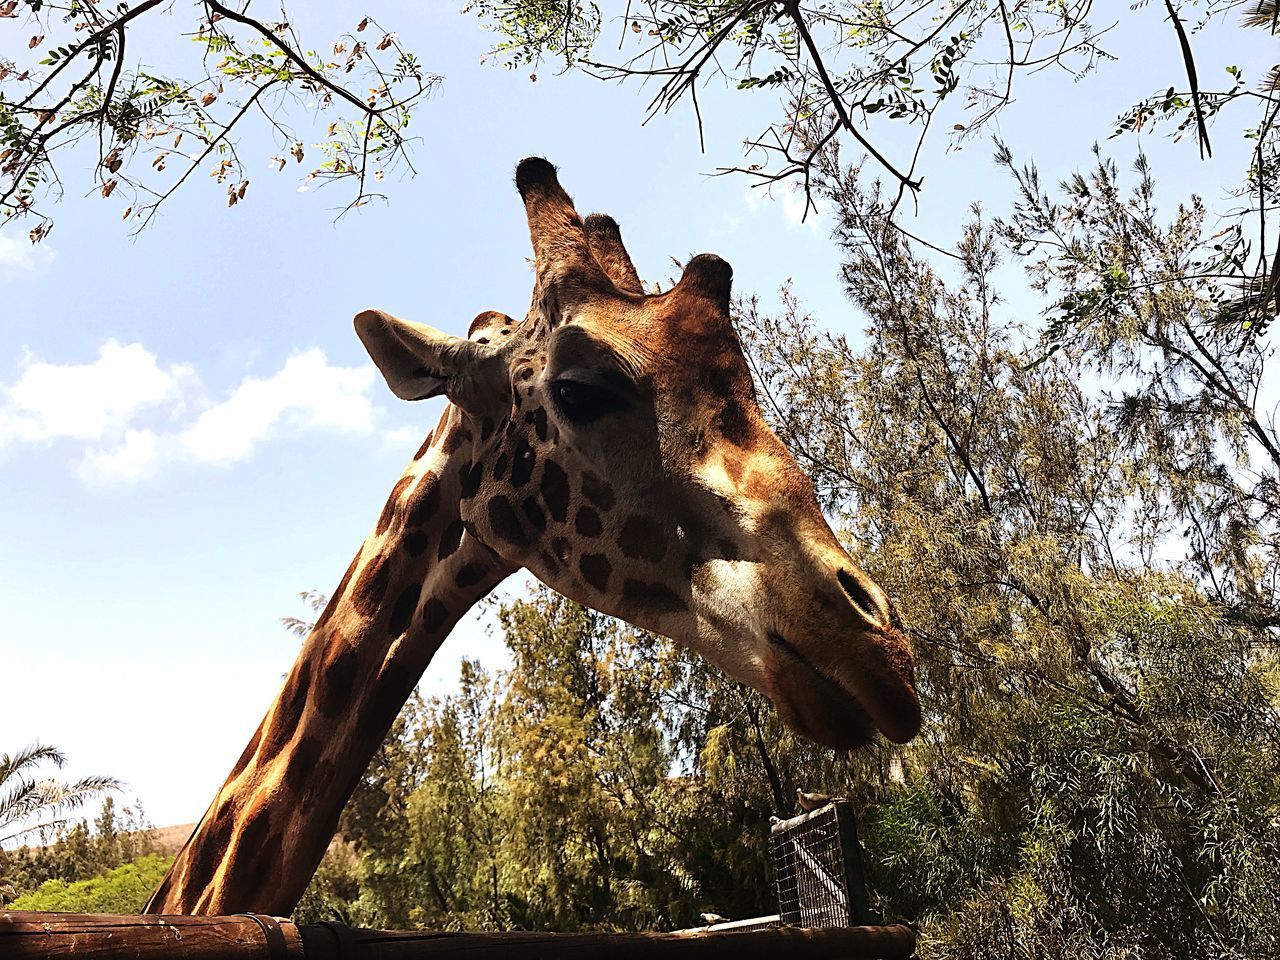 LOW ANGLE VIEW OF GIRAFFE AGAINST SKY